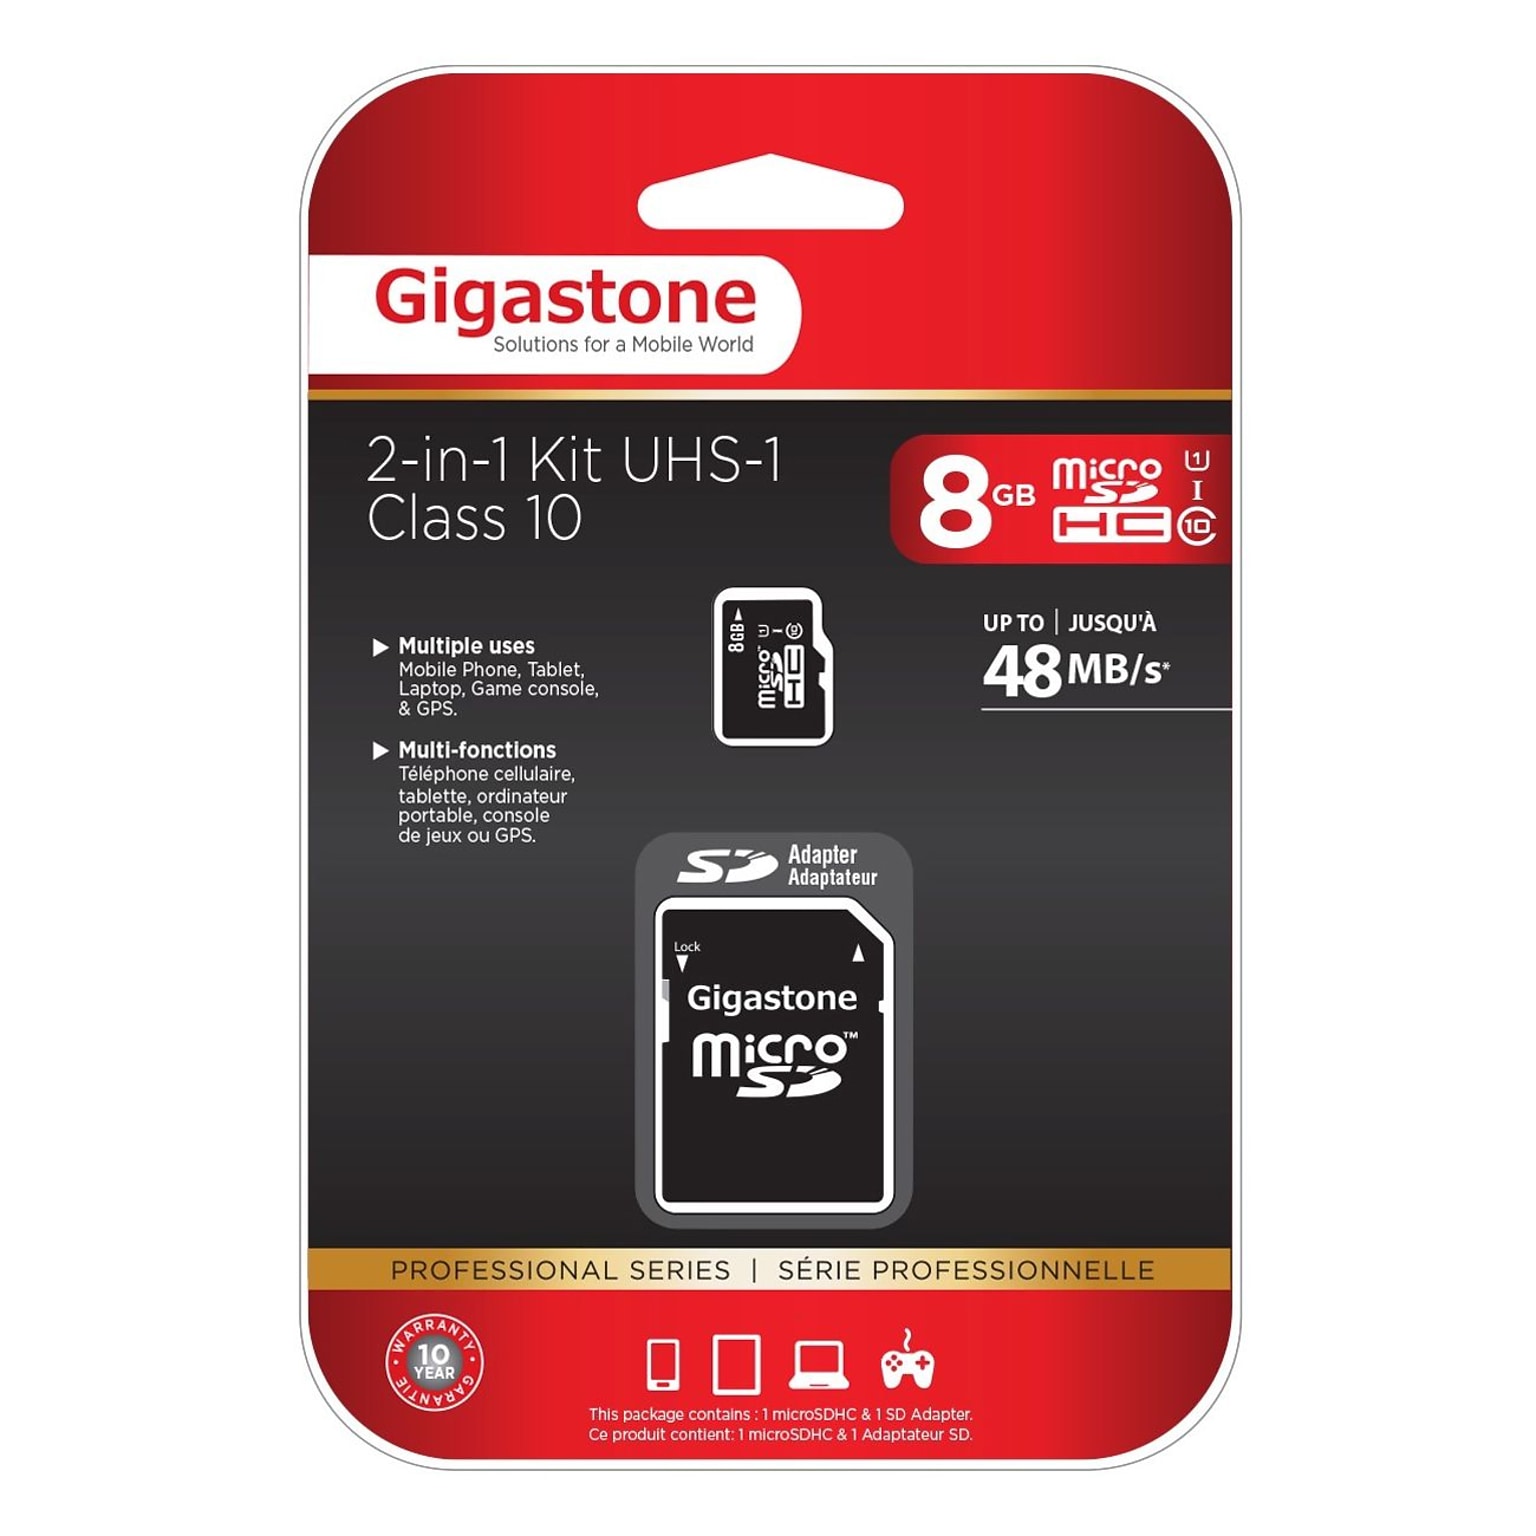 Gigastone 8GB SDHC Memory Card with Adapter, Class 10, UHS-I (DEM2IN1C1008GR)